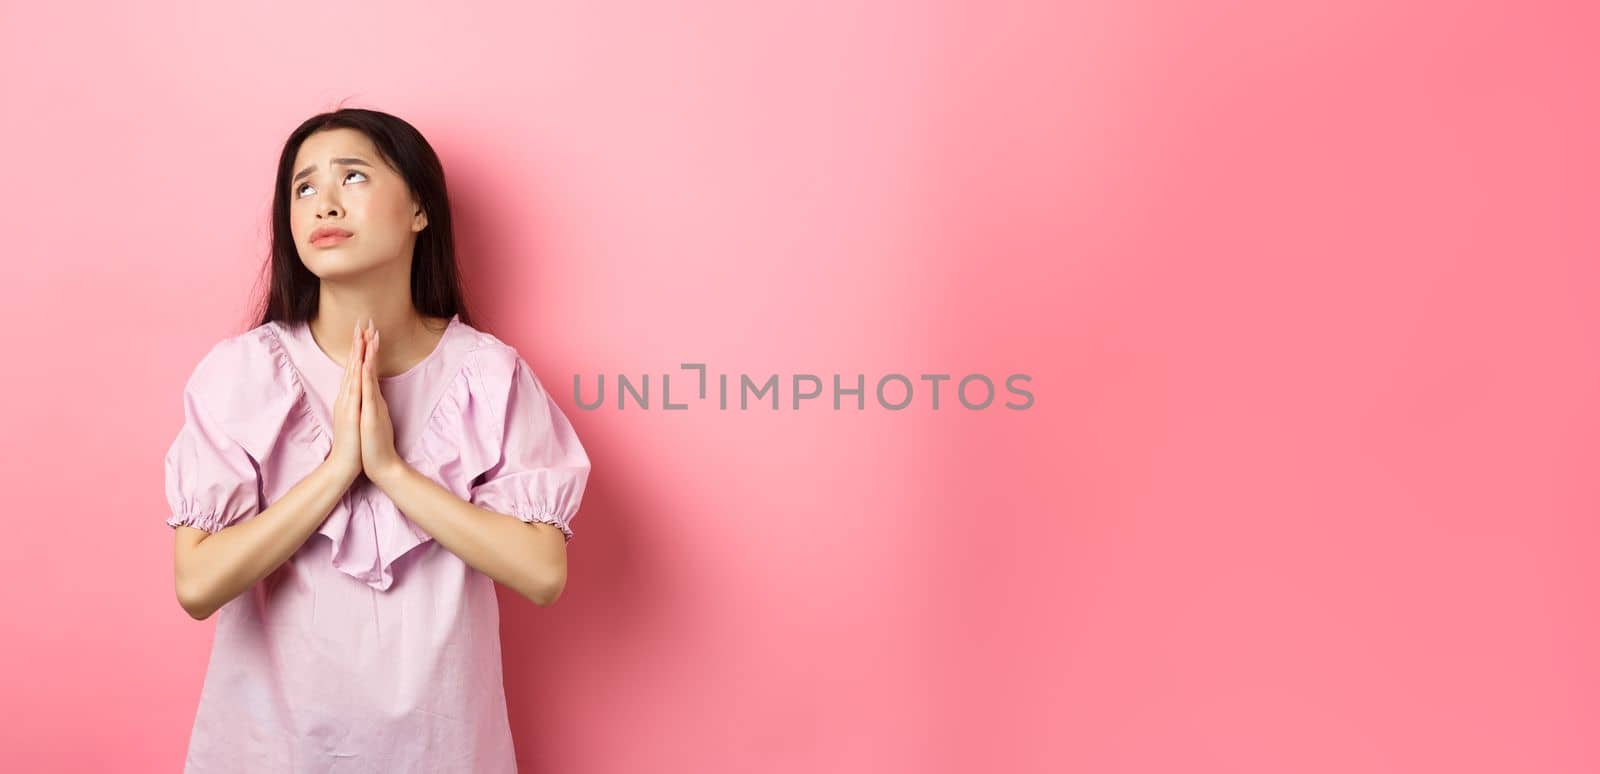 Hopeful asian girl praying god, looking up to plead or pray, making wish, supplicating with dramatic face, standing against pink background.